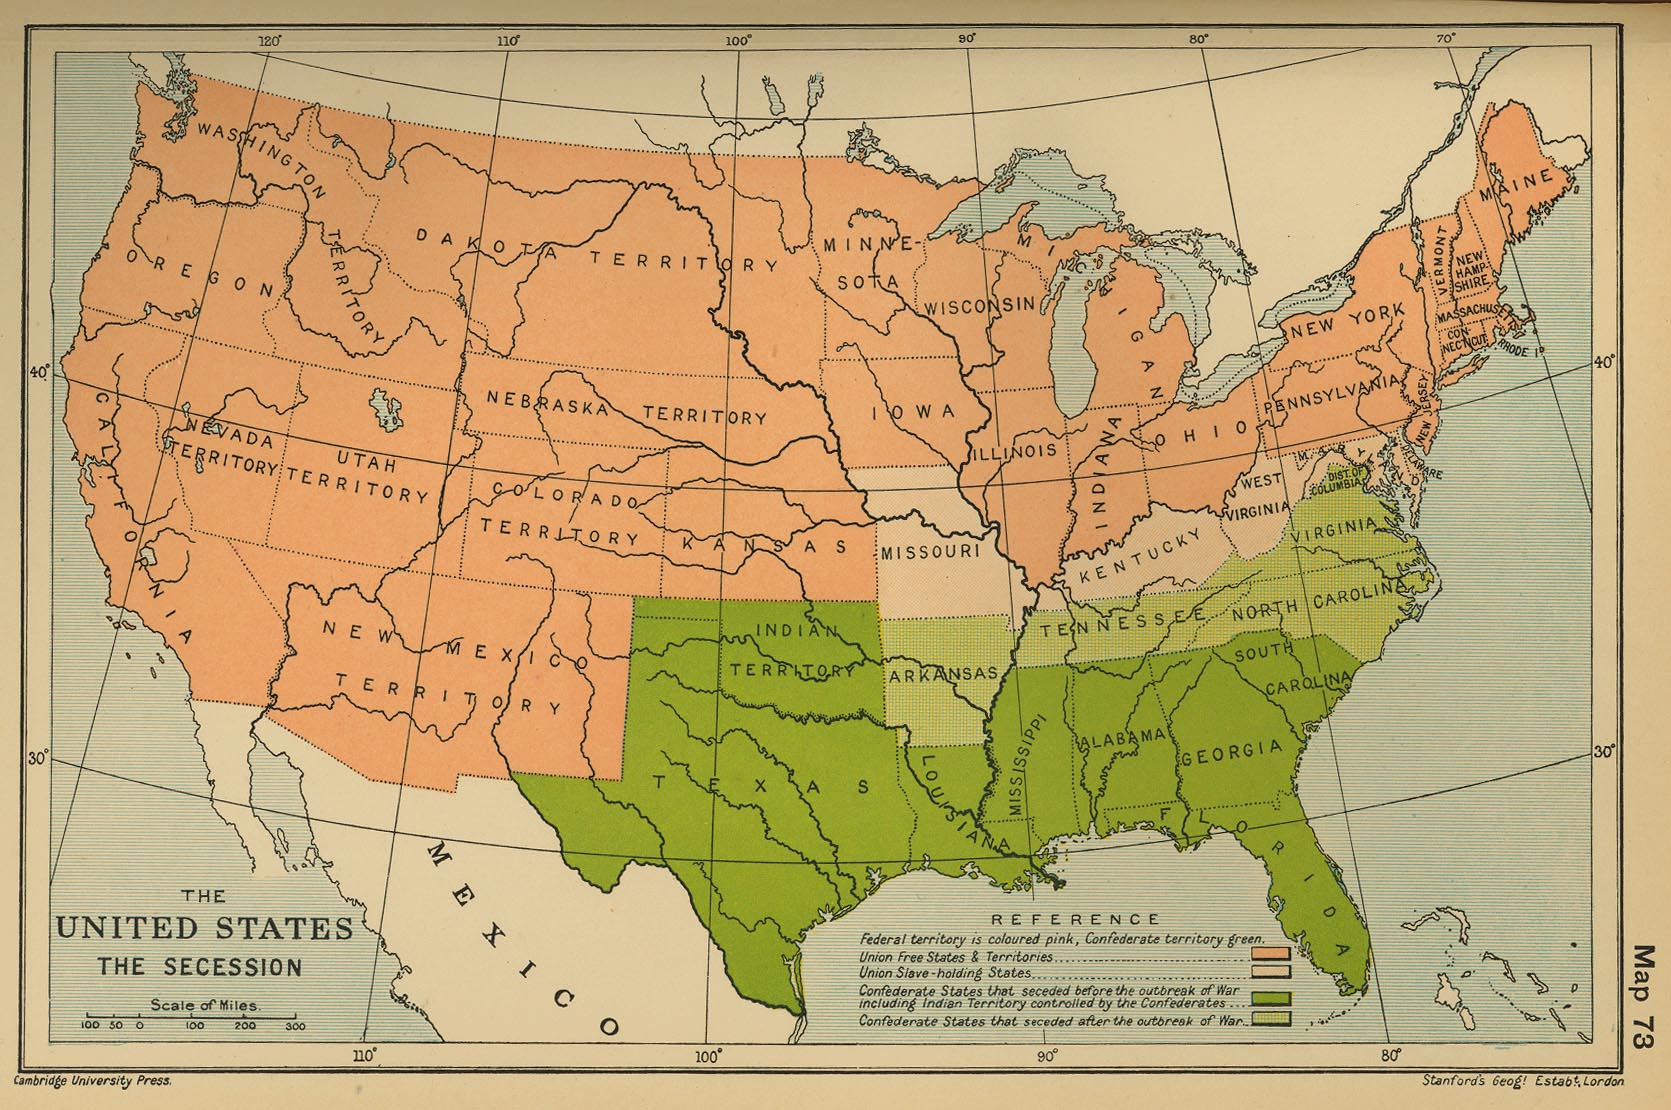 Map of the United States: The Secession 1860